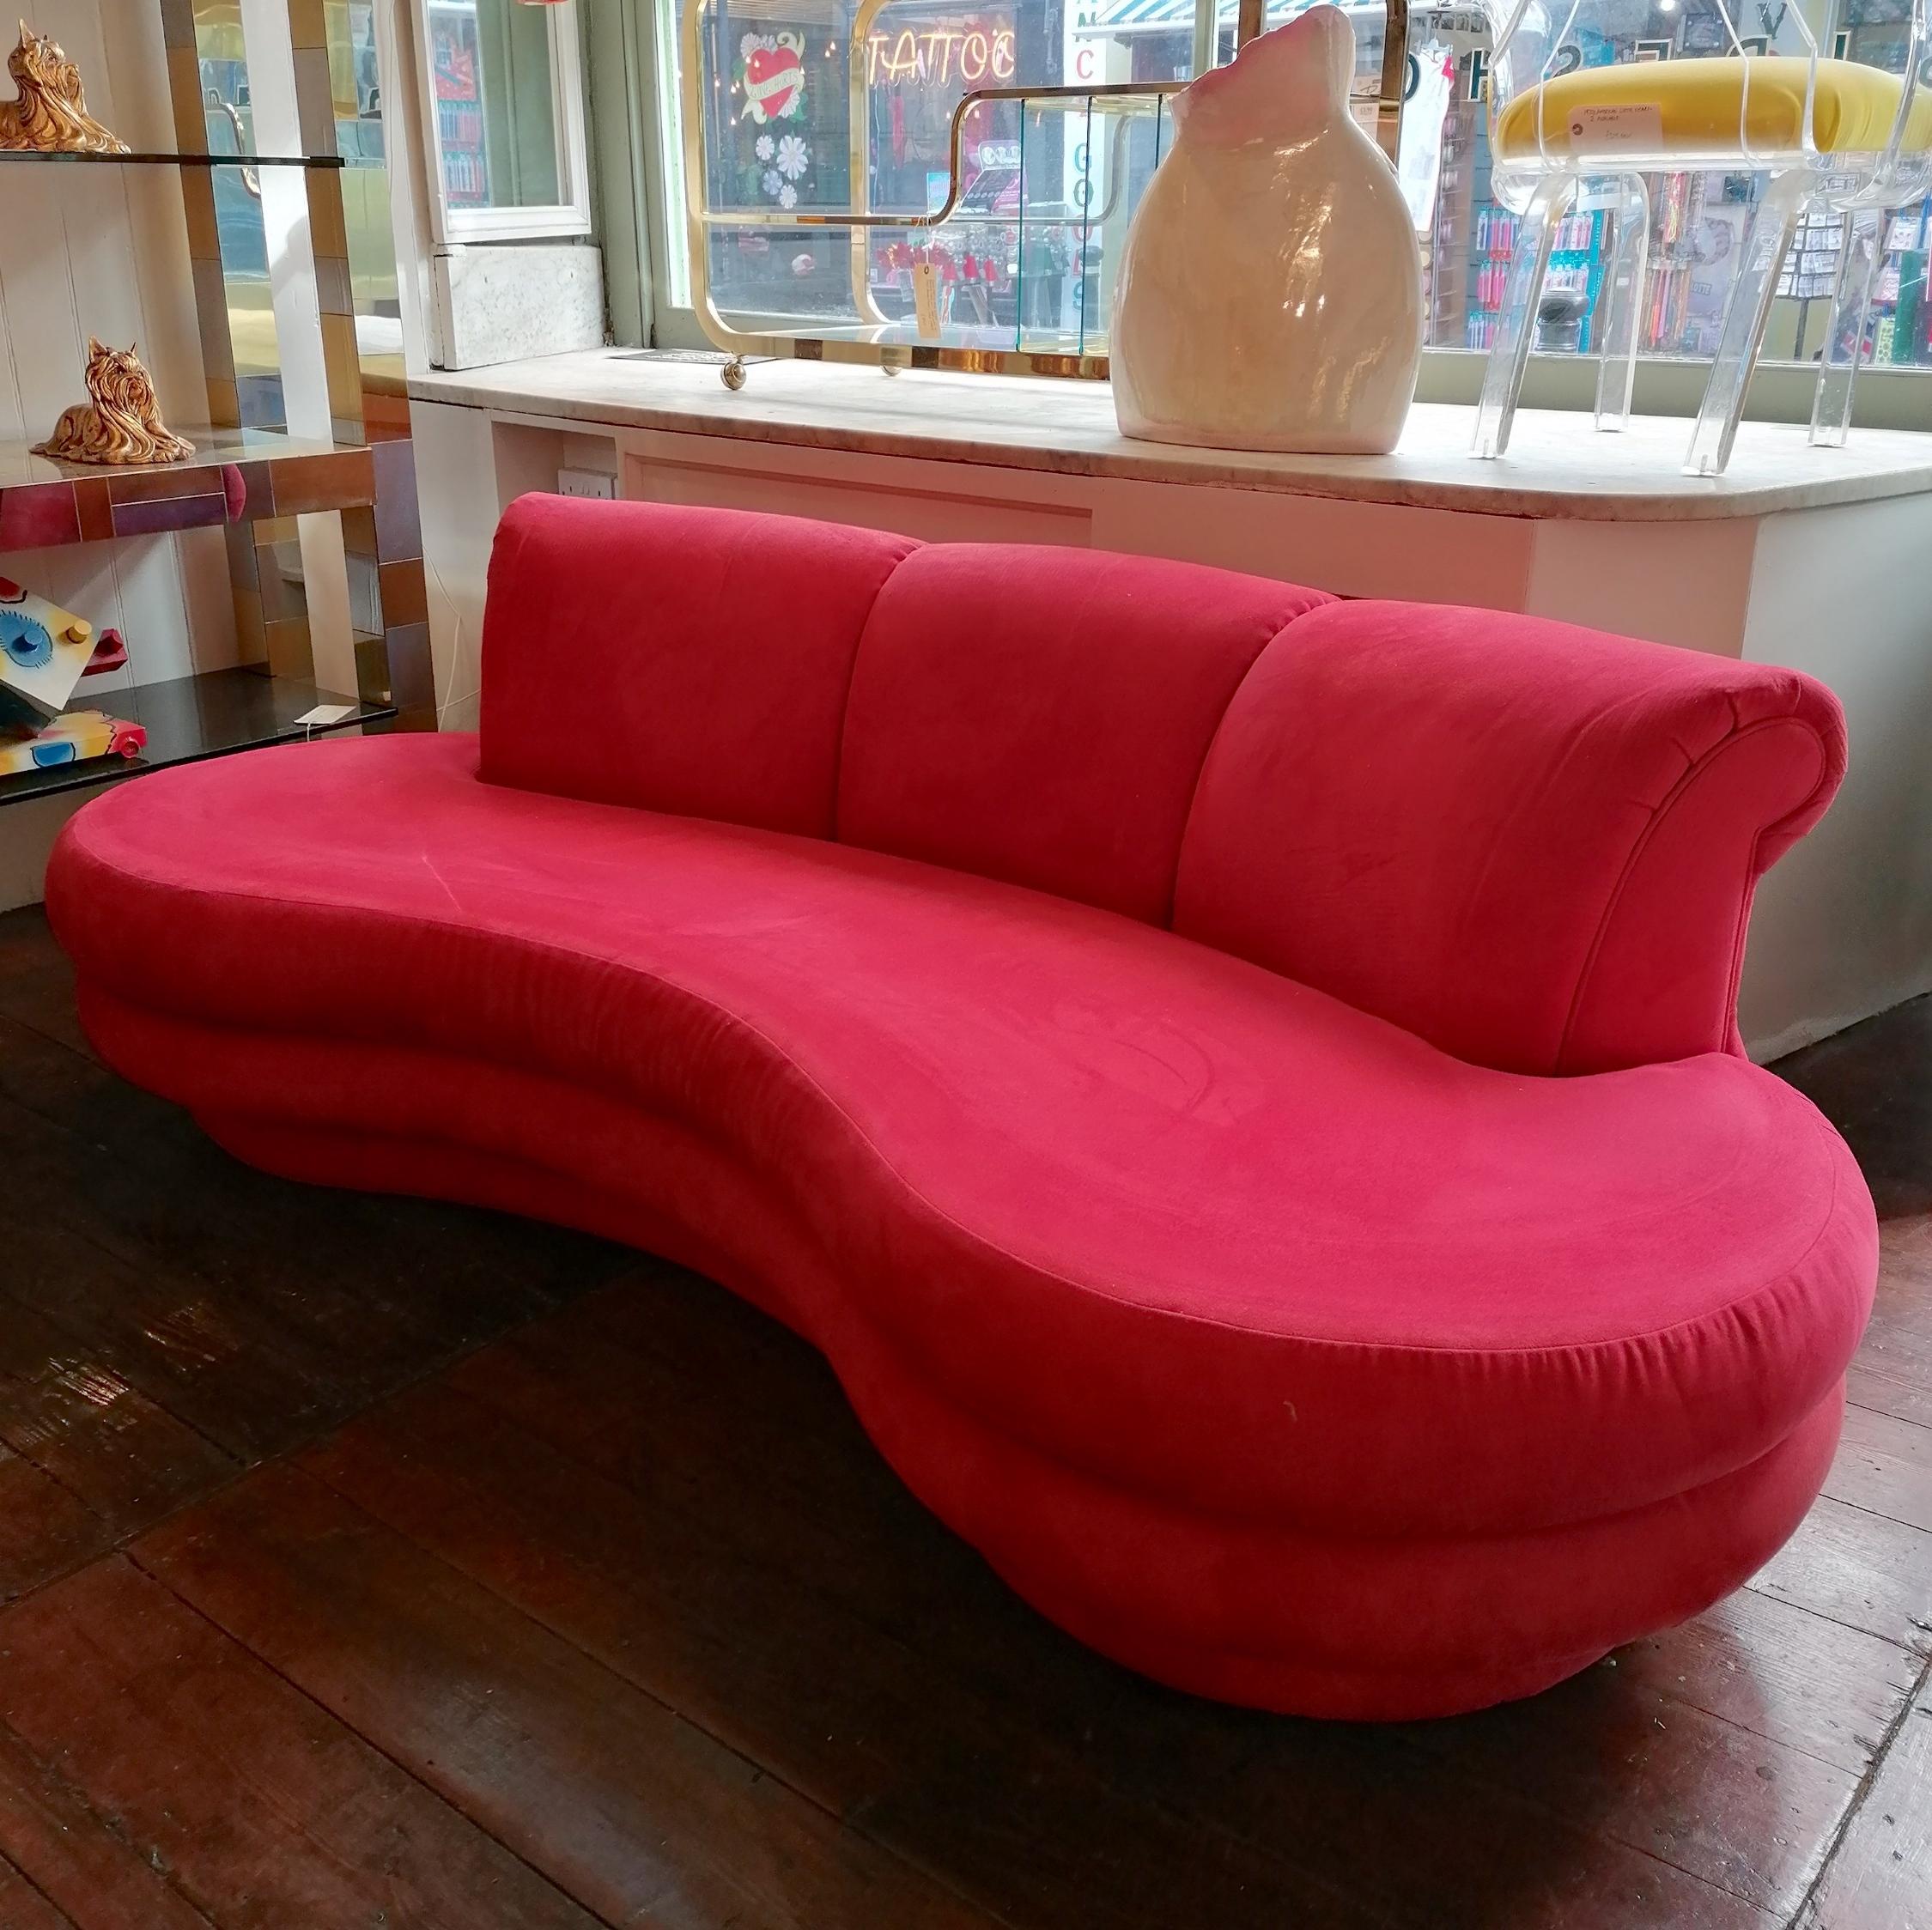 Stunning sculptural curved cloud sofa by Adrian Pearsall for Comfort Designs, USA 1980s. The original raspberry red (or lipstick red?) ultrasuede upholstery is in great condition for its age. A really comfortable sofa.
Please note: the white streak